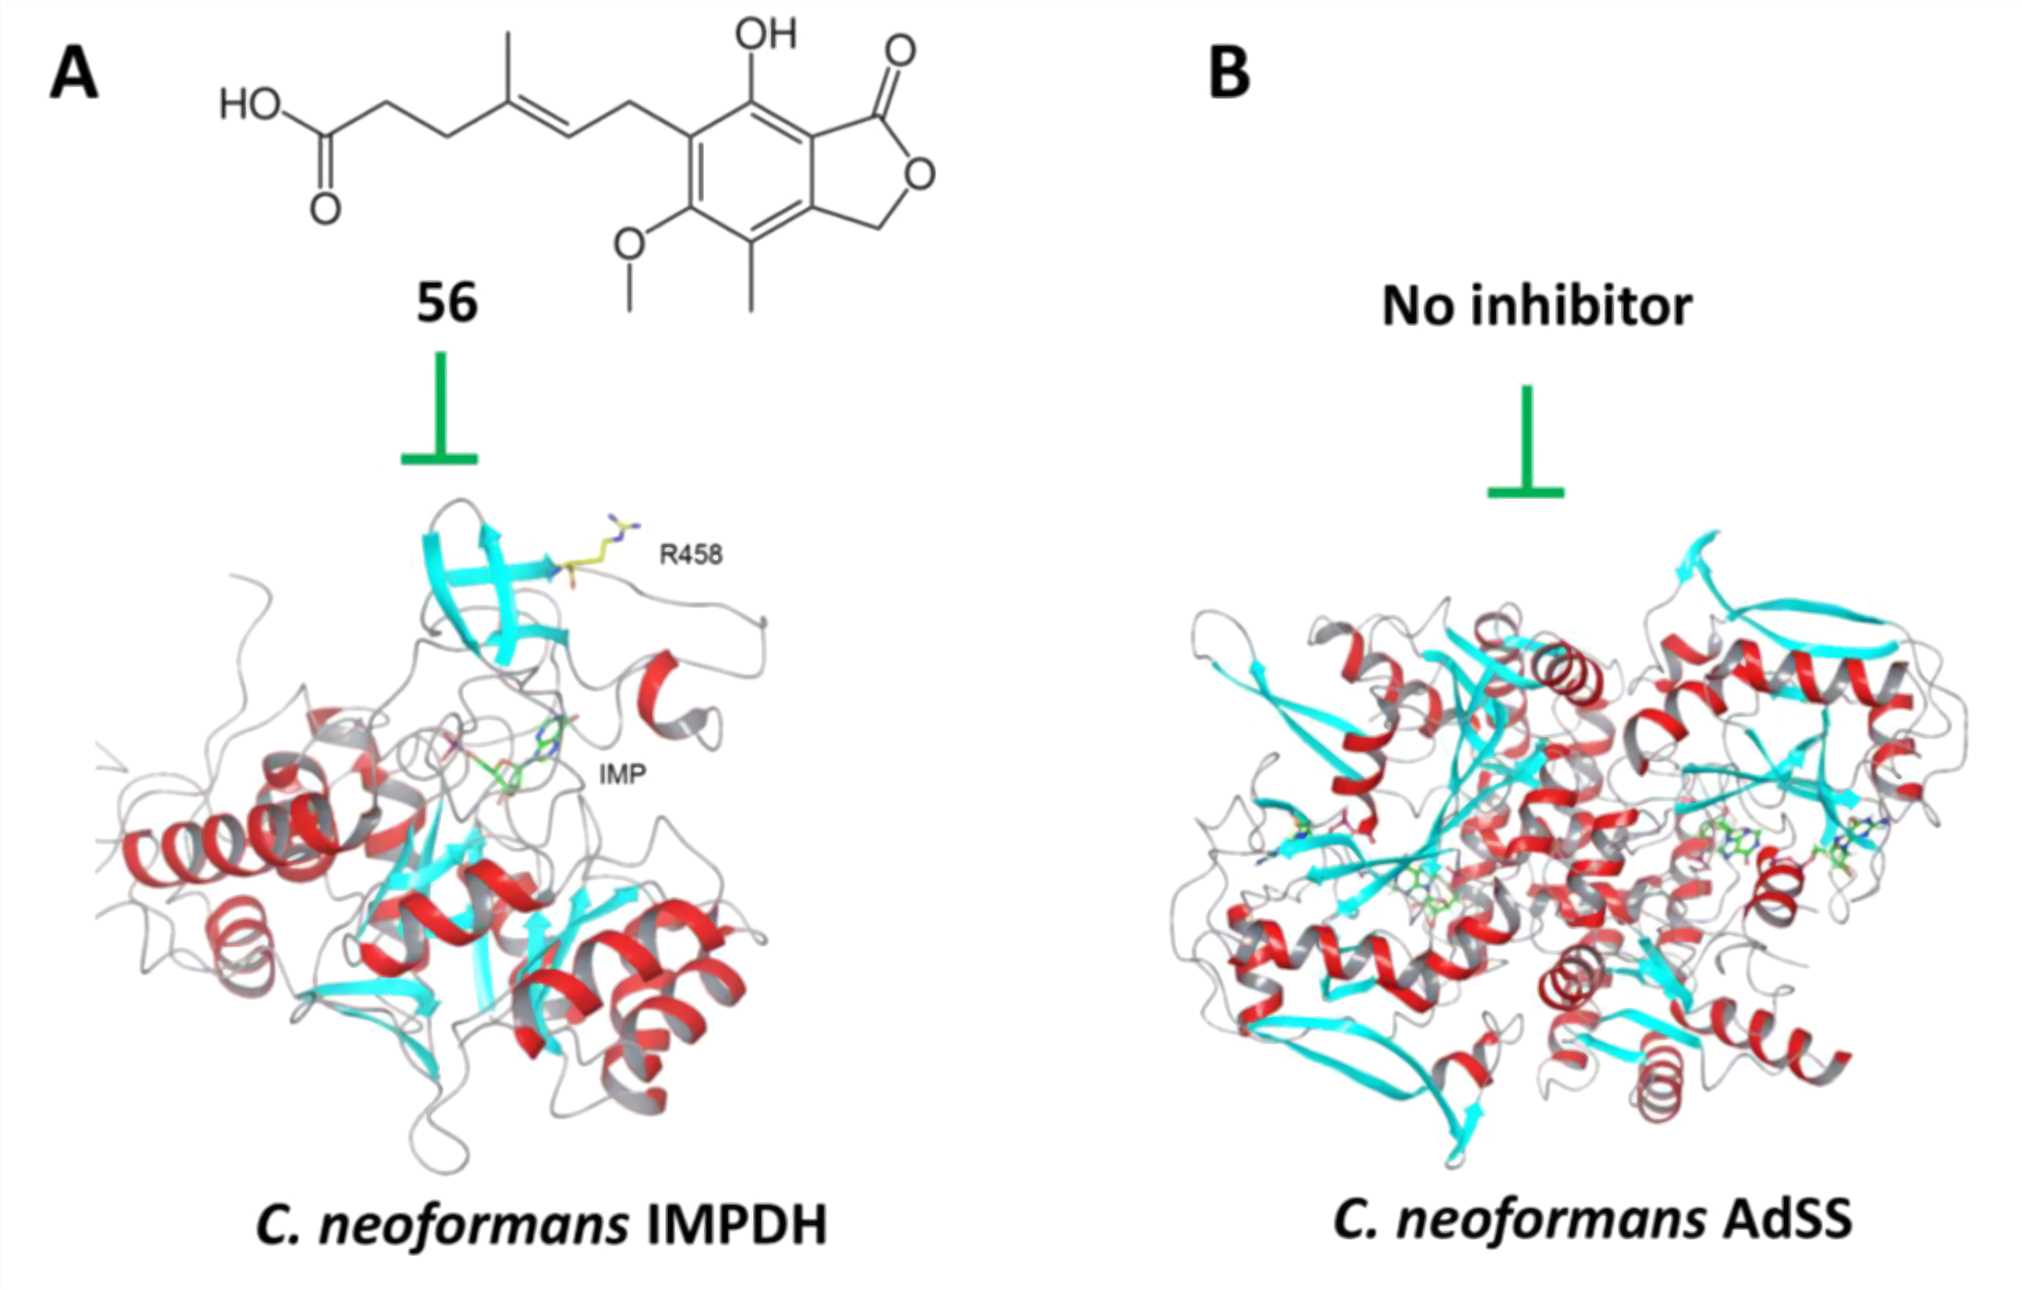 Potential antifungal targets in purine metabolism. (A) Crystal structure (PDB 4AF0) and an inhibitor of C. neoformans IMPDH. (B) Crystal structure of C. neoformans AdSS (PDB 5I34).